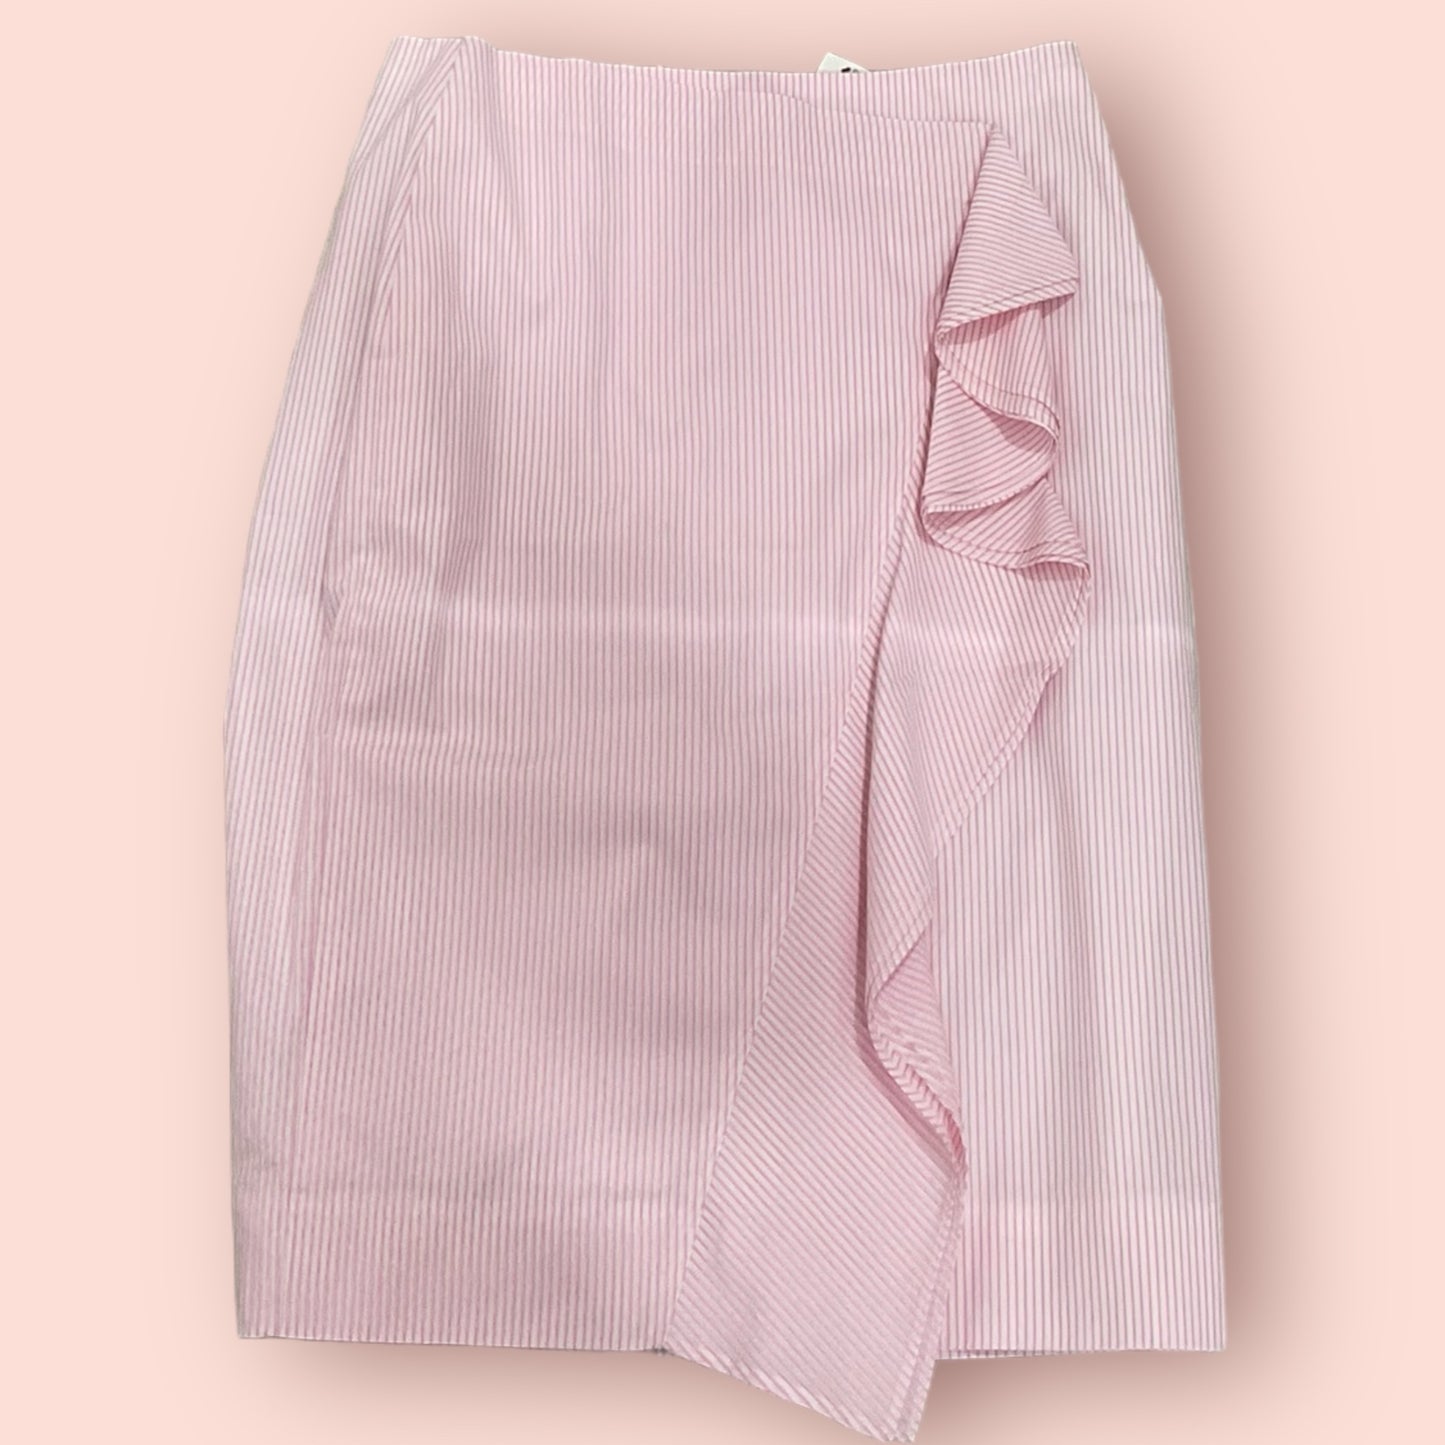 J. Crew Size 6 NWT Pink and White Skirt